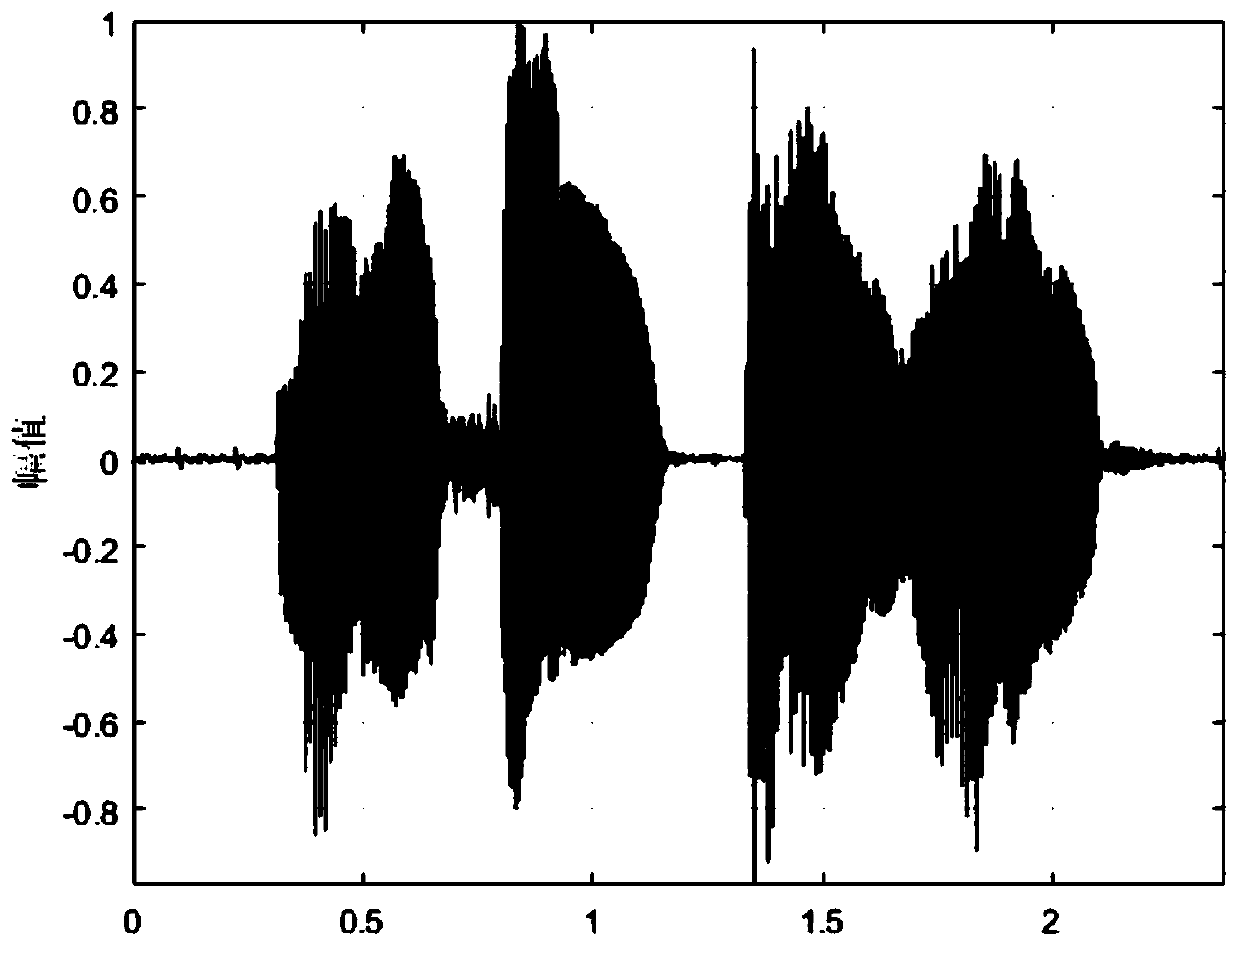 Voice noise reduction method based on spectral subtraction and wavelet transform